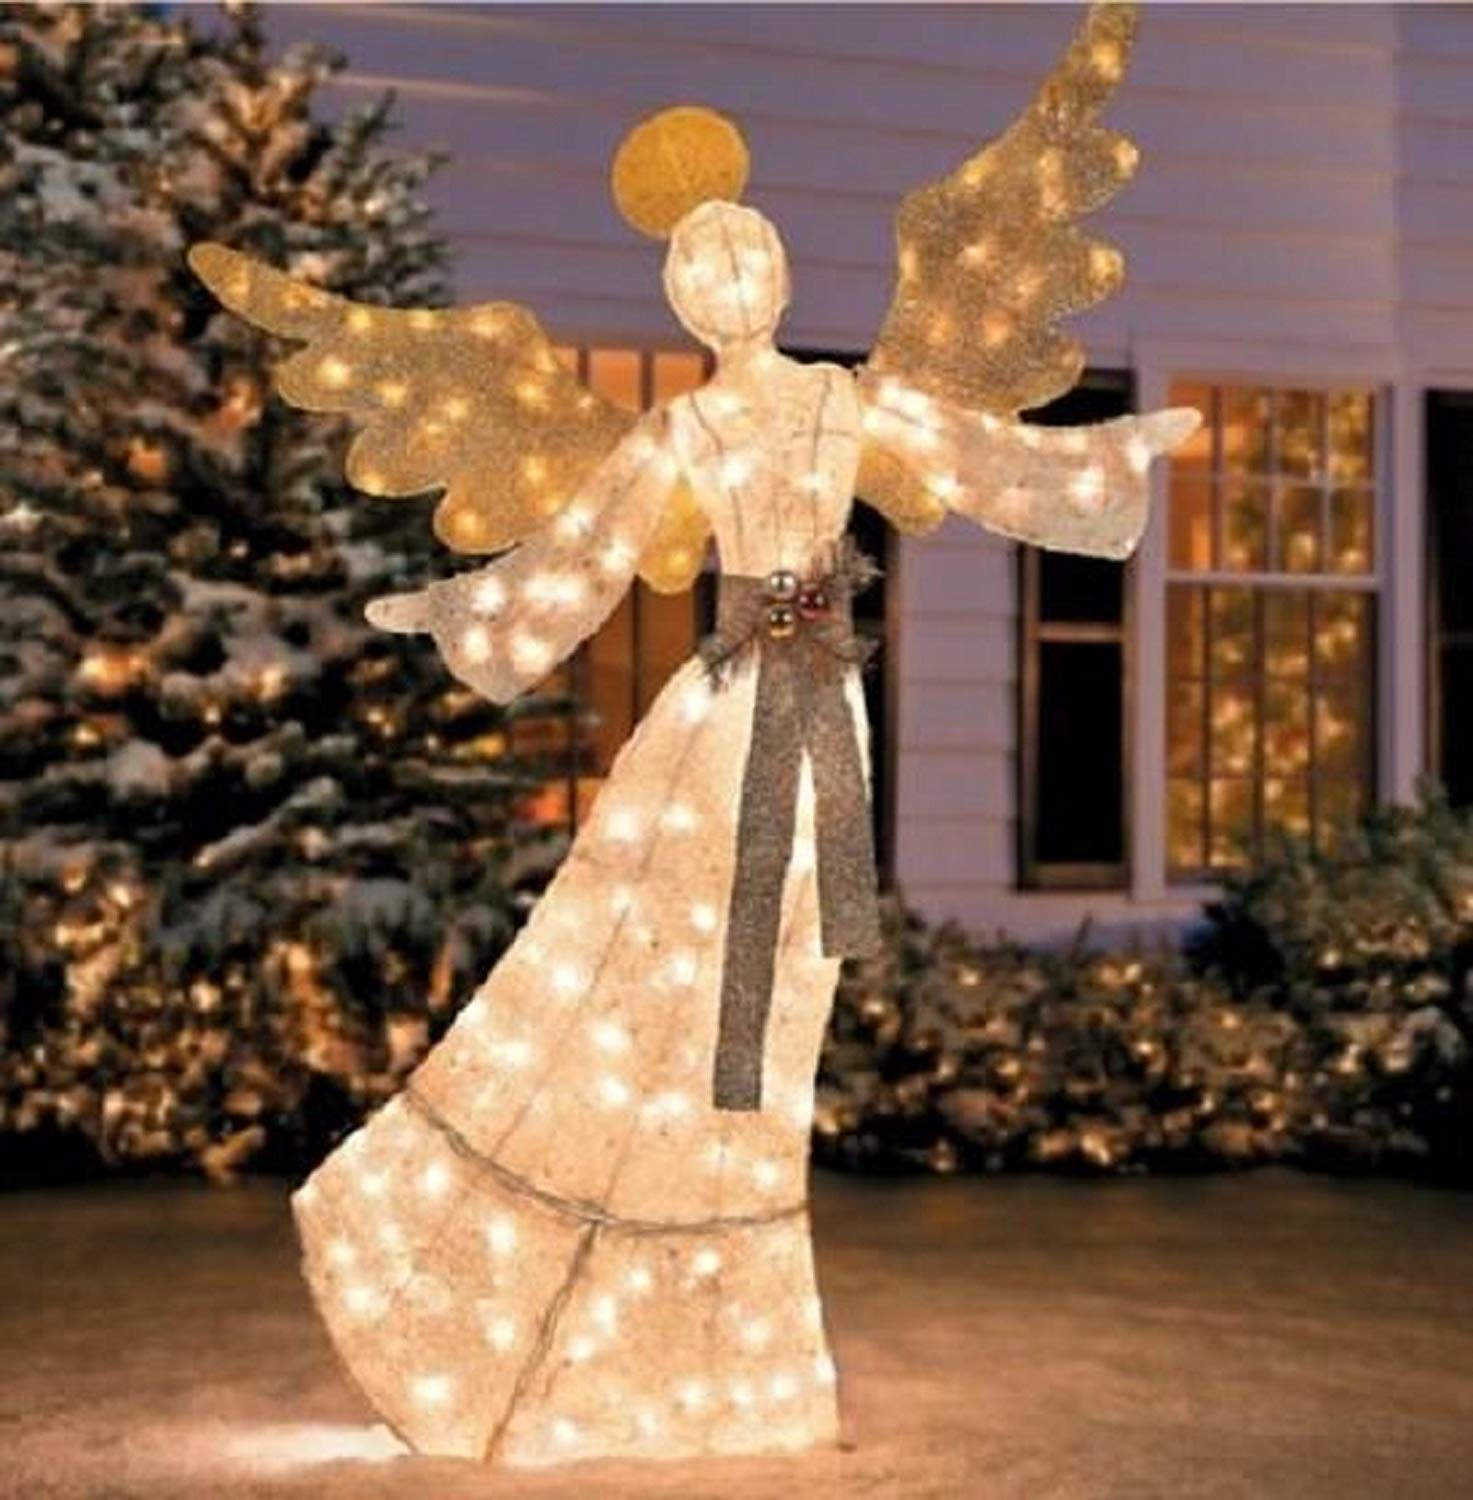 Outdoor Lighted Christmas Angel
 Angels Lighted Yard Displays